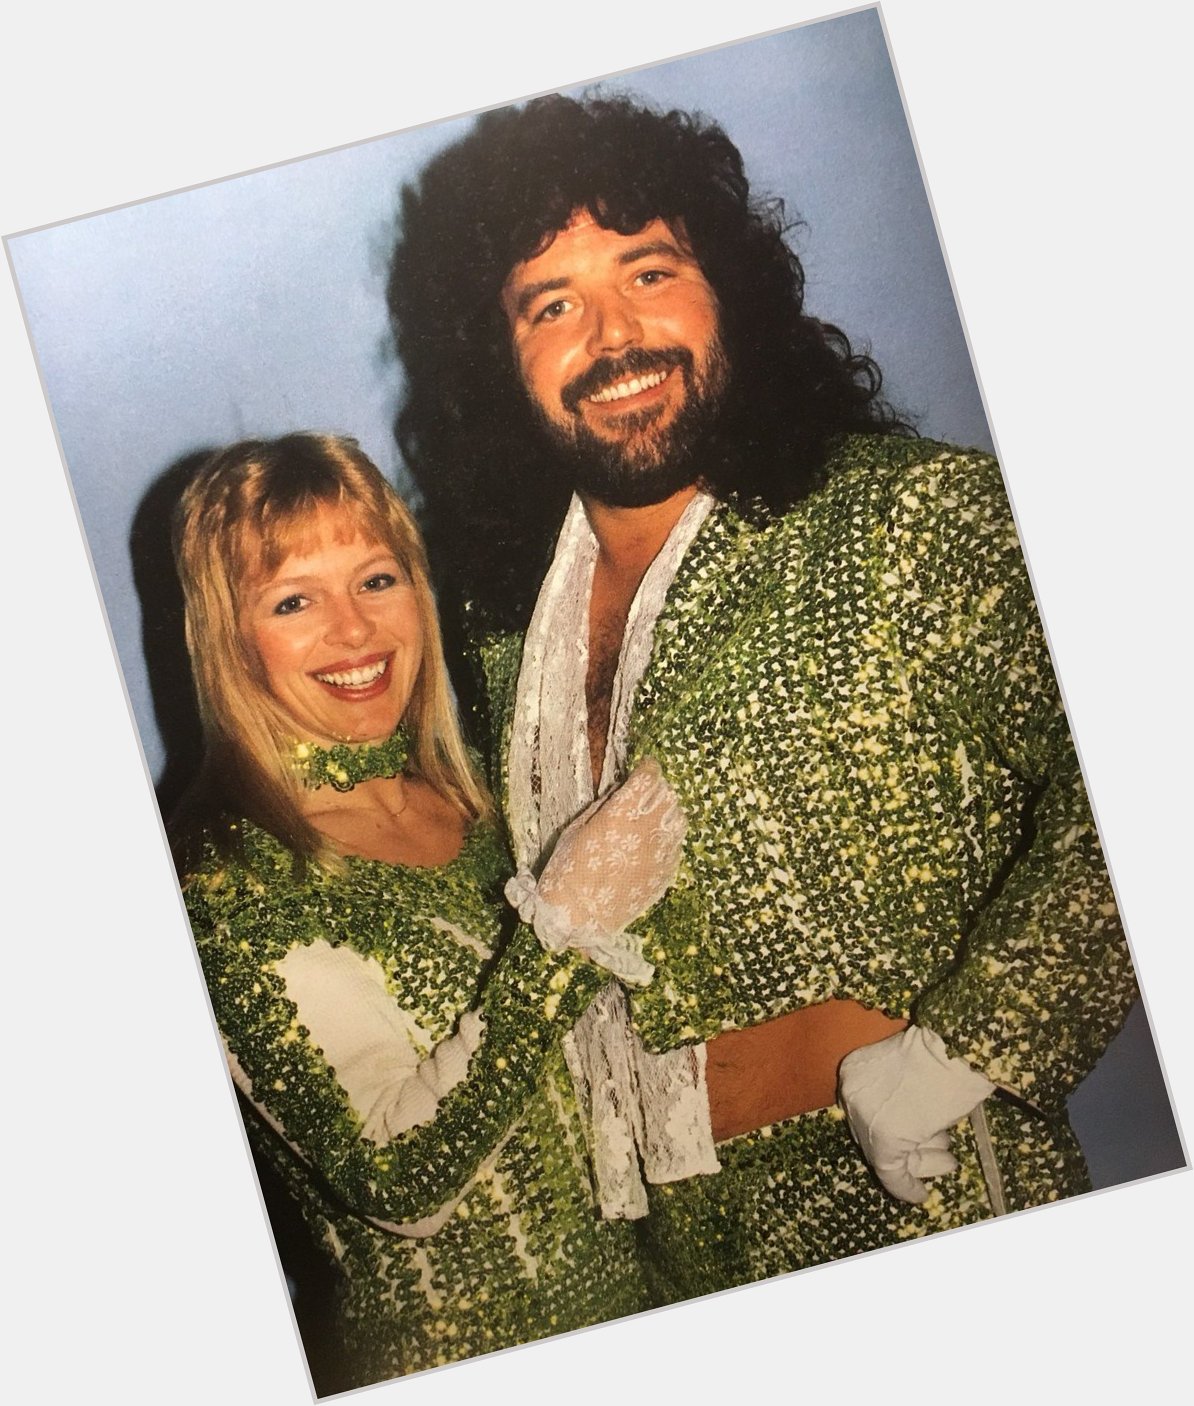 Happy 66th Birthday today to Jimmy Garvin! 